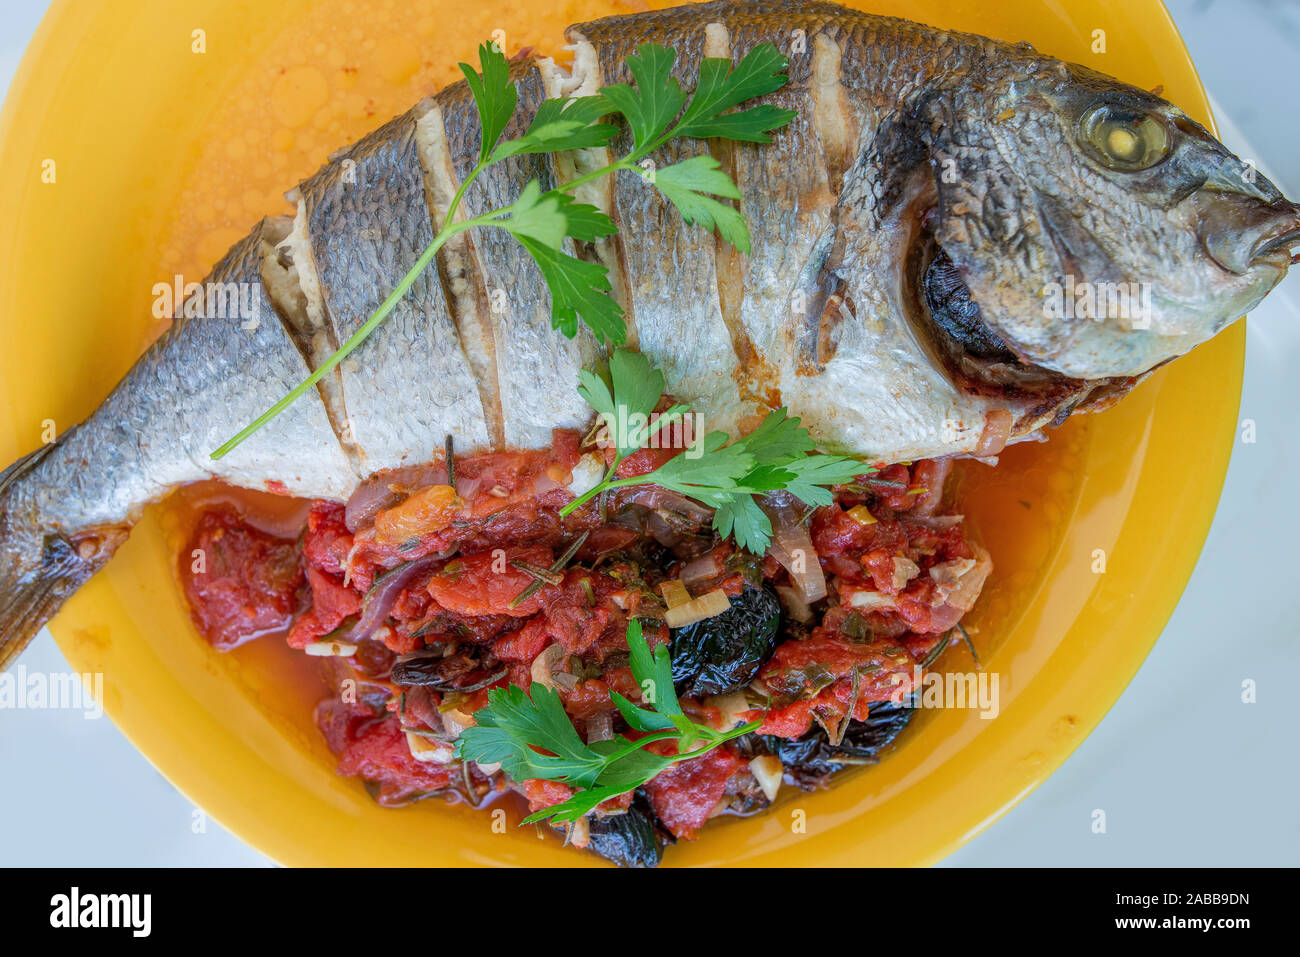 Cooked whole sea bream fish with tomato and parsley garnish beautifully served on a plate. Stock Photo